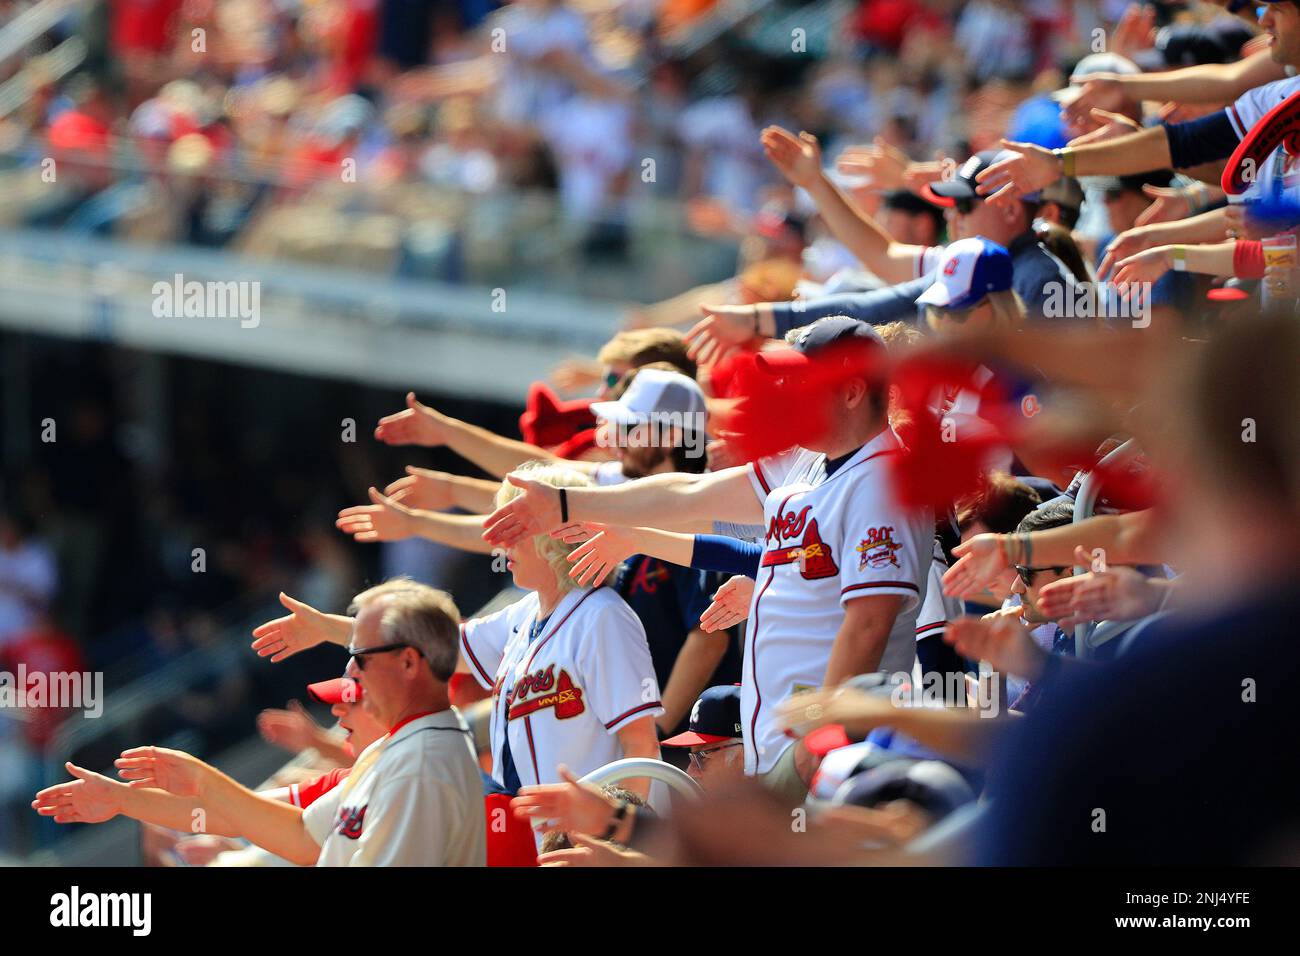 ATLANTA, GA - OCTOBER 11: Fans do The Chop during Game 1 of the NLDS  between the Atlanta Braves and the Philadephia Phillies on October 11, 2022  at Truist Park in Atlanta